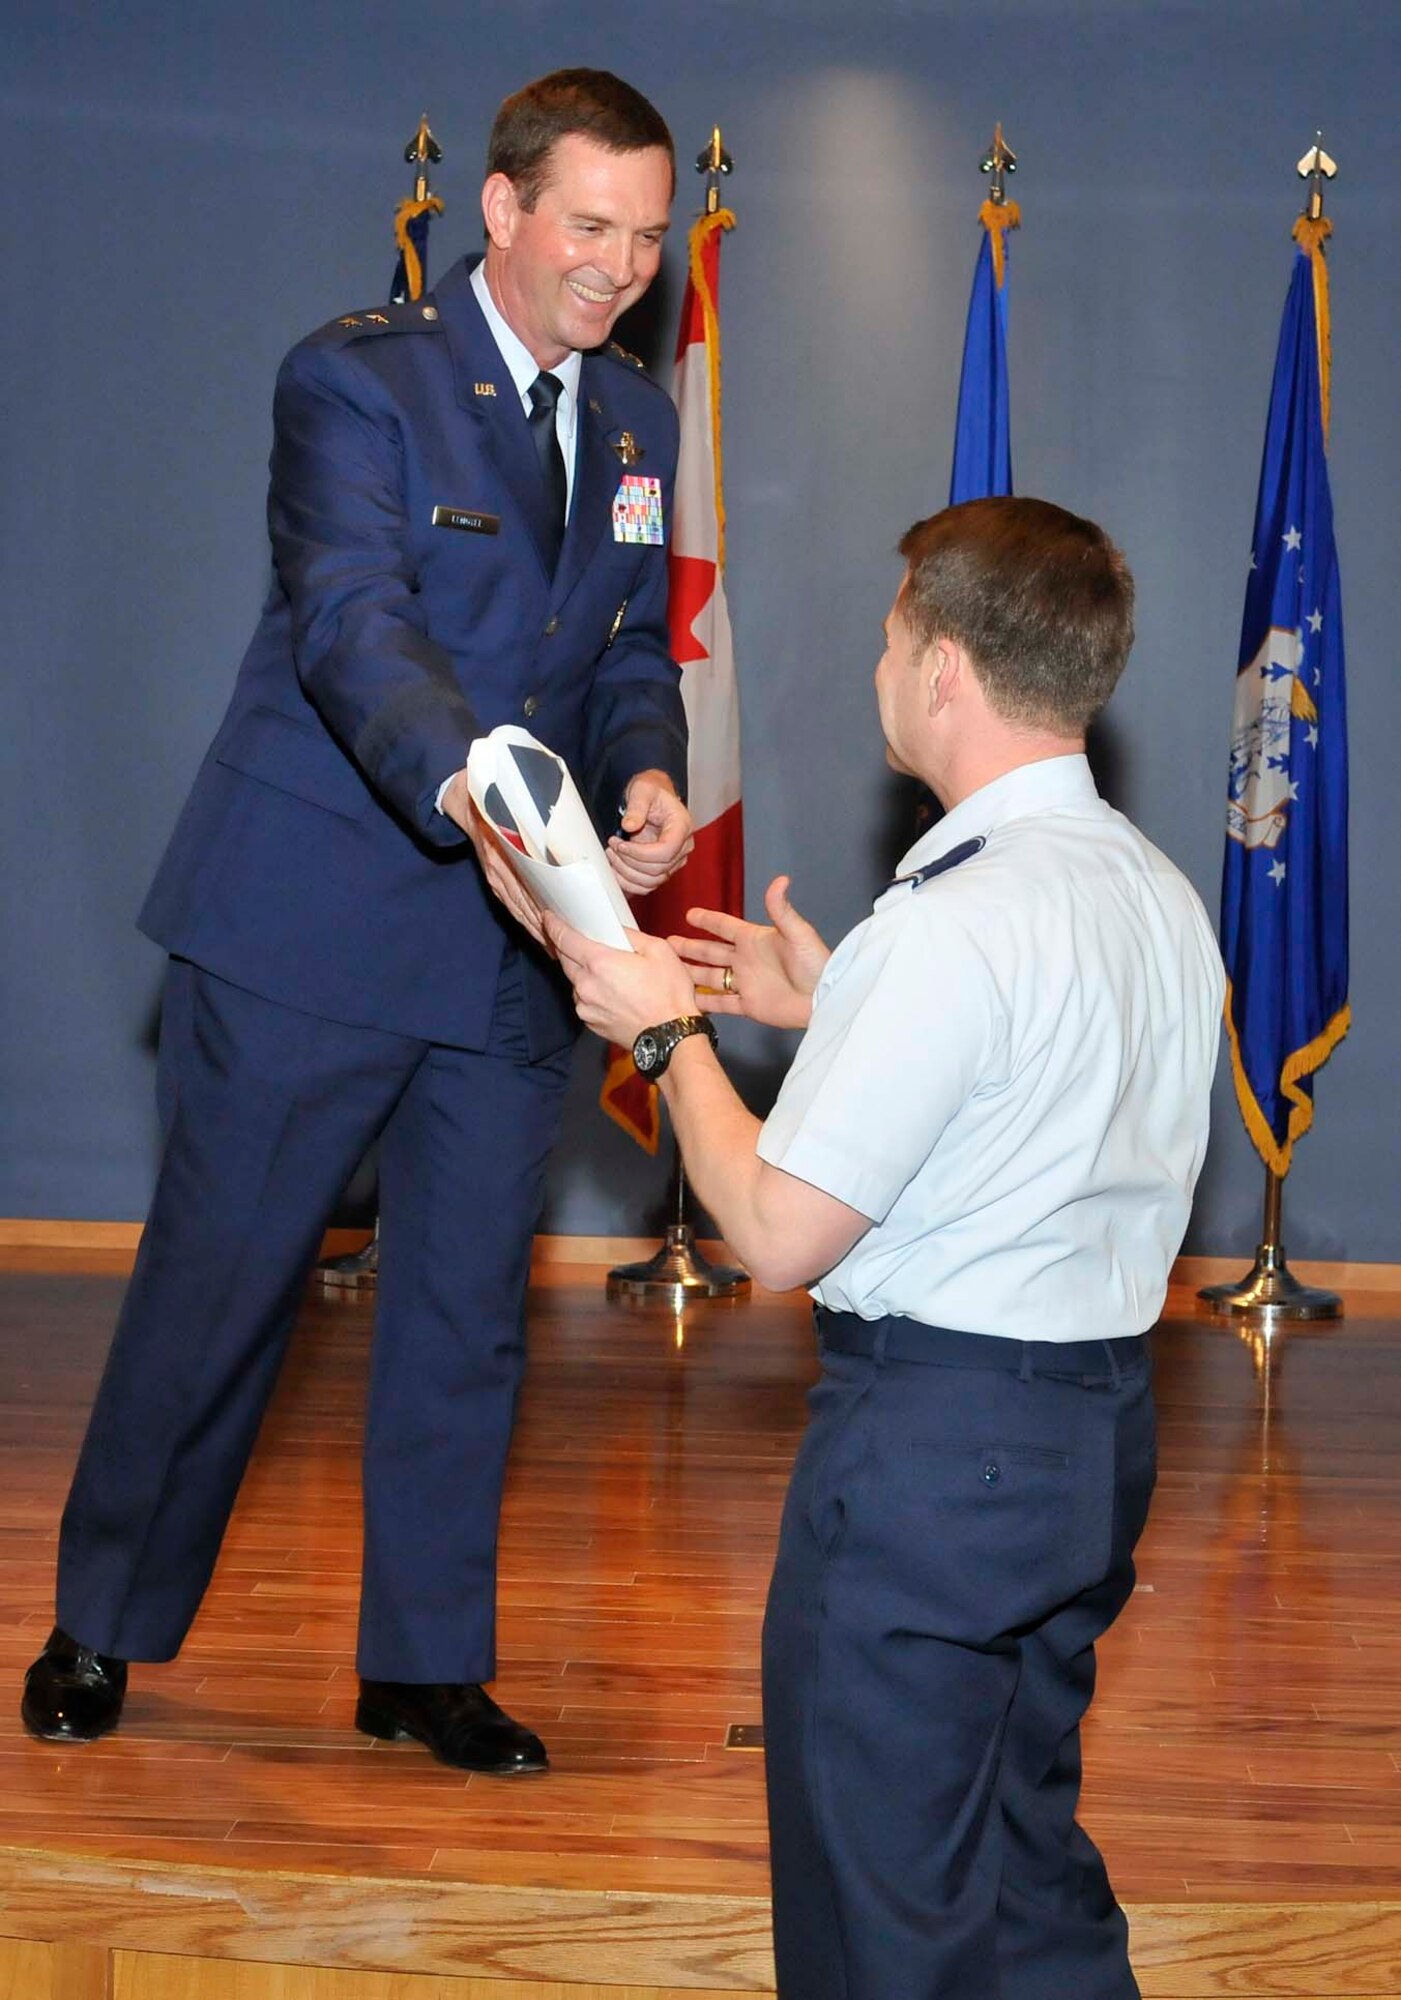 Maj. Gen. Joseph Lengyel jokingly hands off some one-star memorabilia to his brother Brig. Gen. Greg Lengyel during his promotion ceremony at Tyndall Air Force Base, Fla., April 1. General Lengyel is the 1st Air Force (Air Forces Northern) vice commander. (U.S. Air Force photo by Lisa Norman)